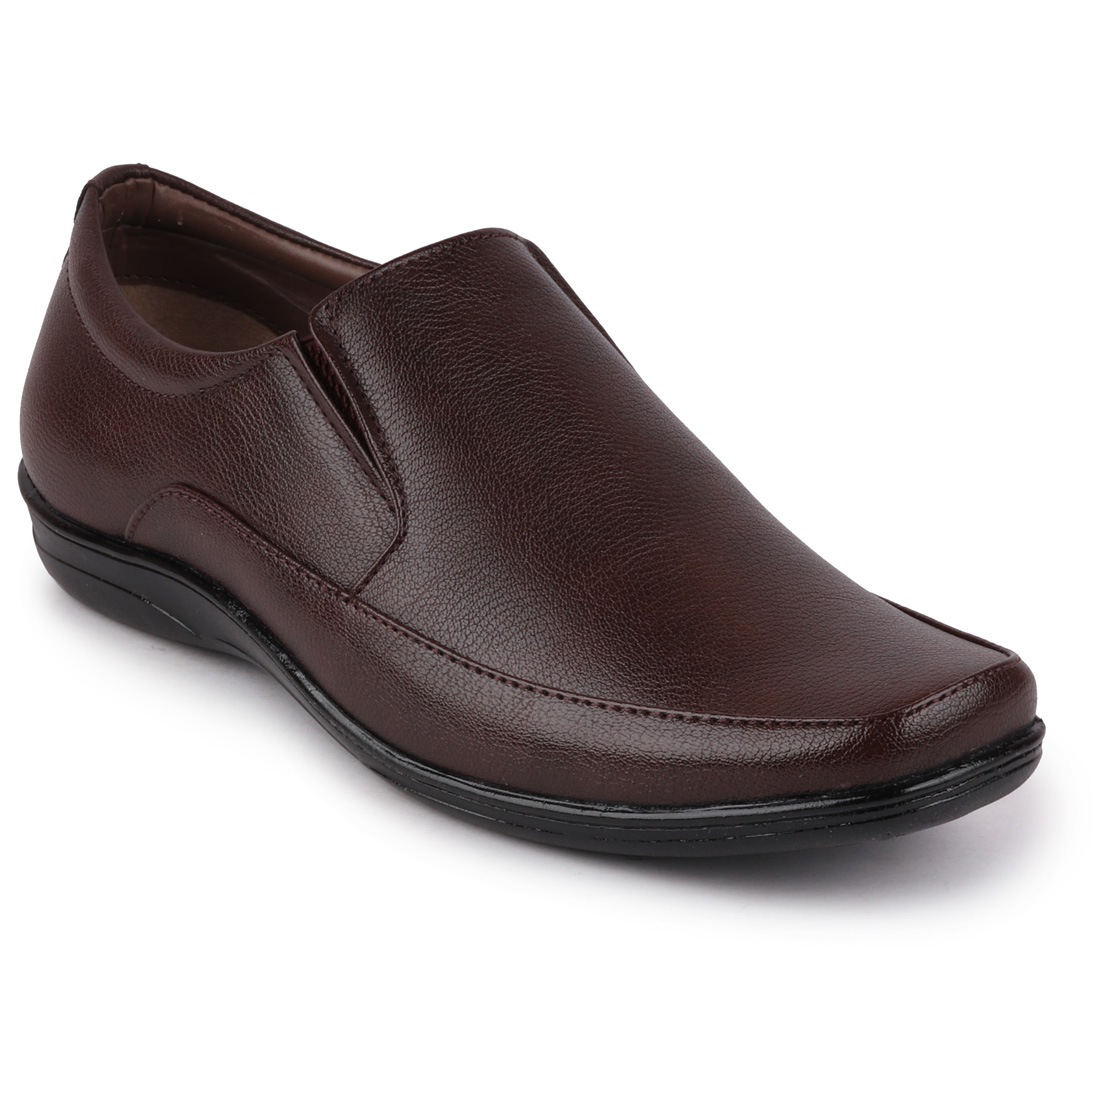 Buy Fausto Men's Brown Formal Slip On Shoes Online @ ₹1079 from ShopClues